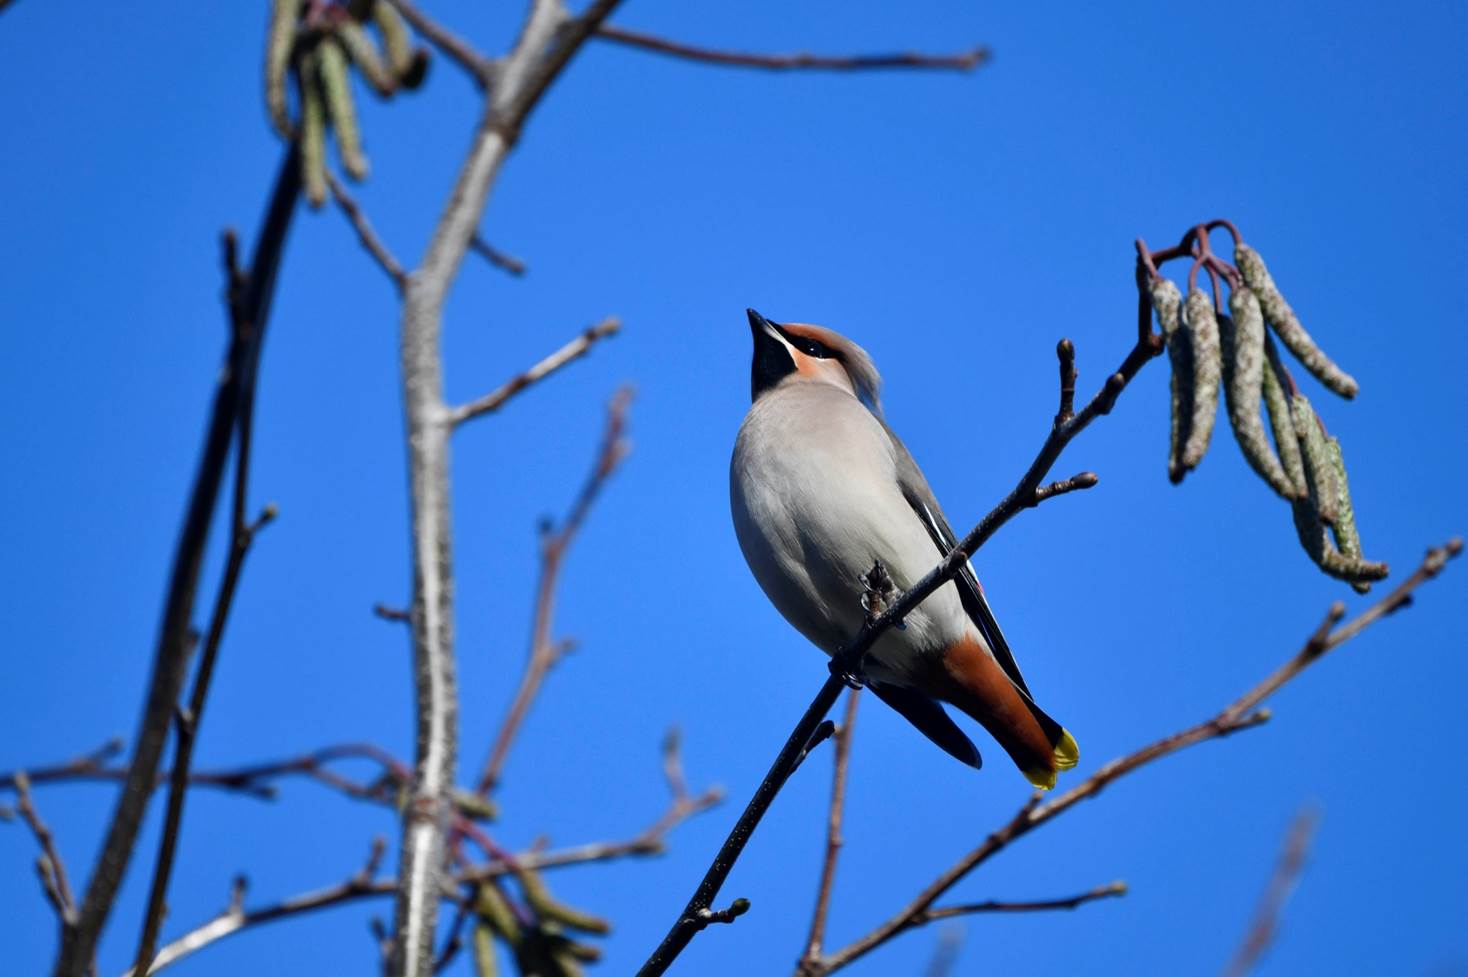 A bird perched on a branch

Description automatically generated